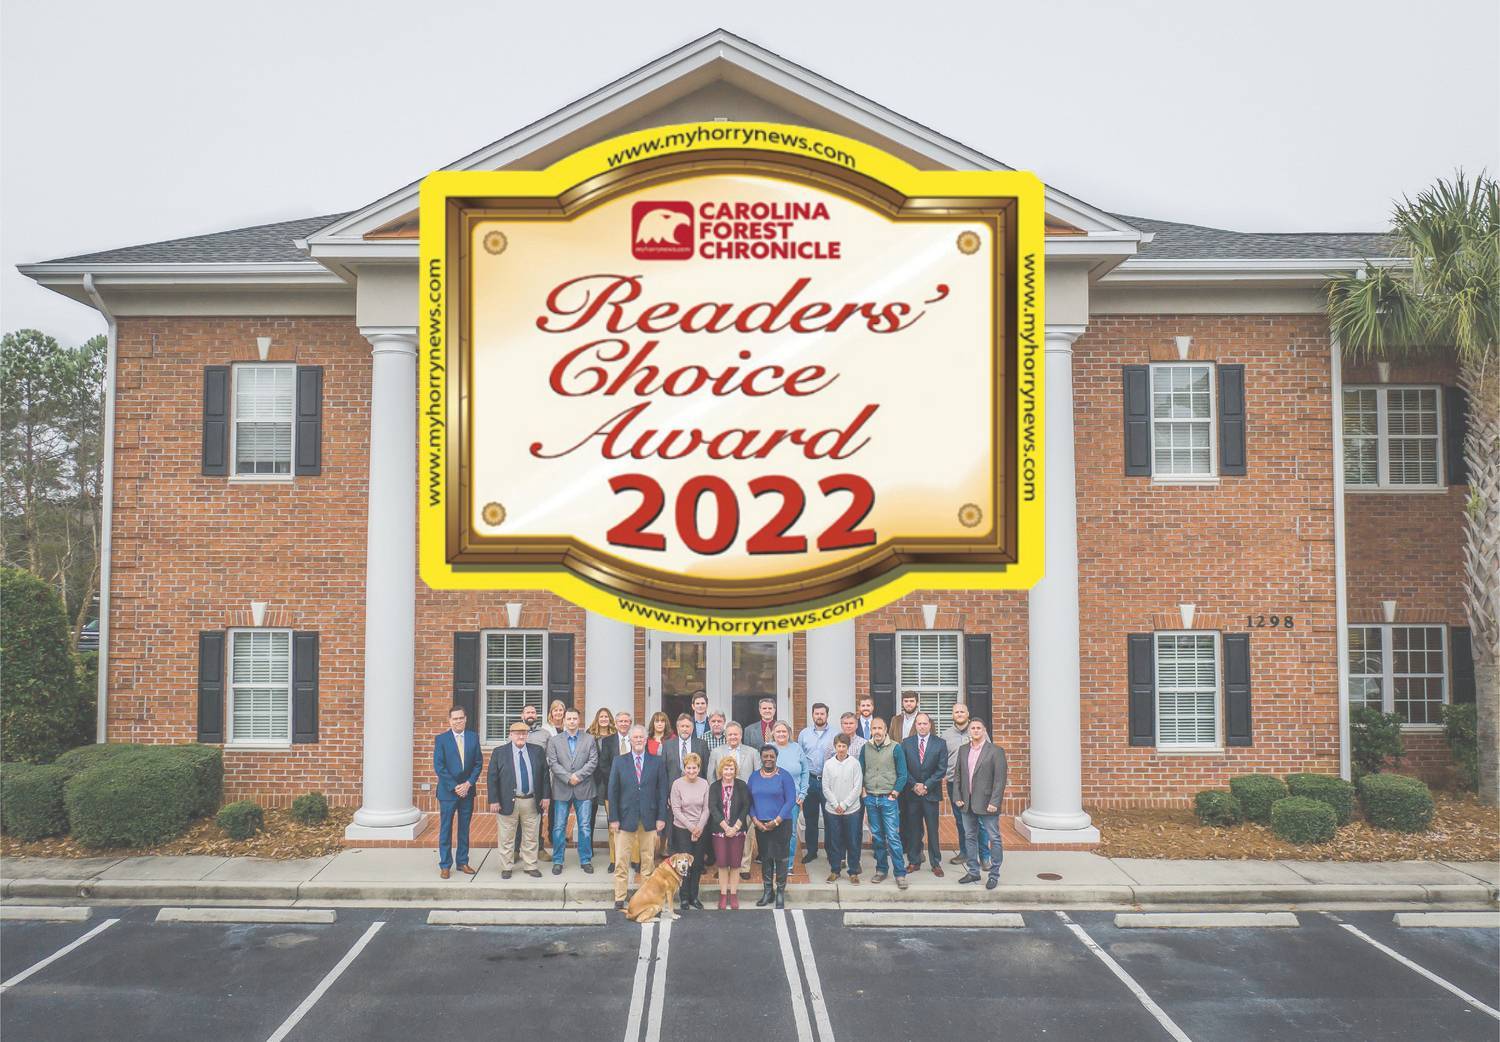 Bolton & Menk, DDC Engineers Named Carolina Forest Chronicle Readers’ Choice Winner 